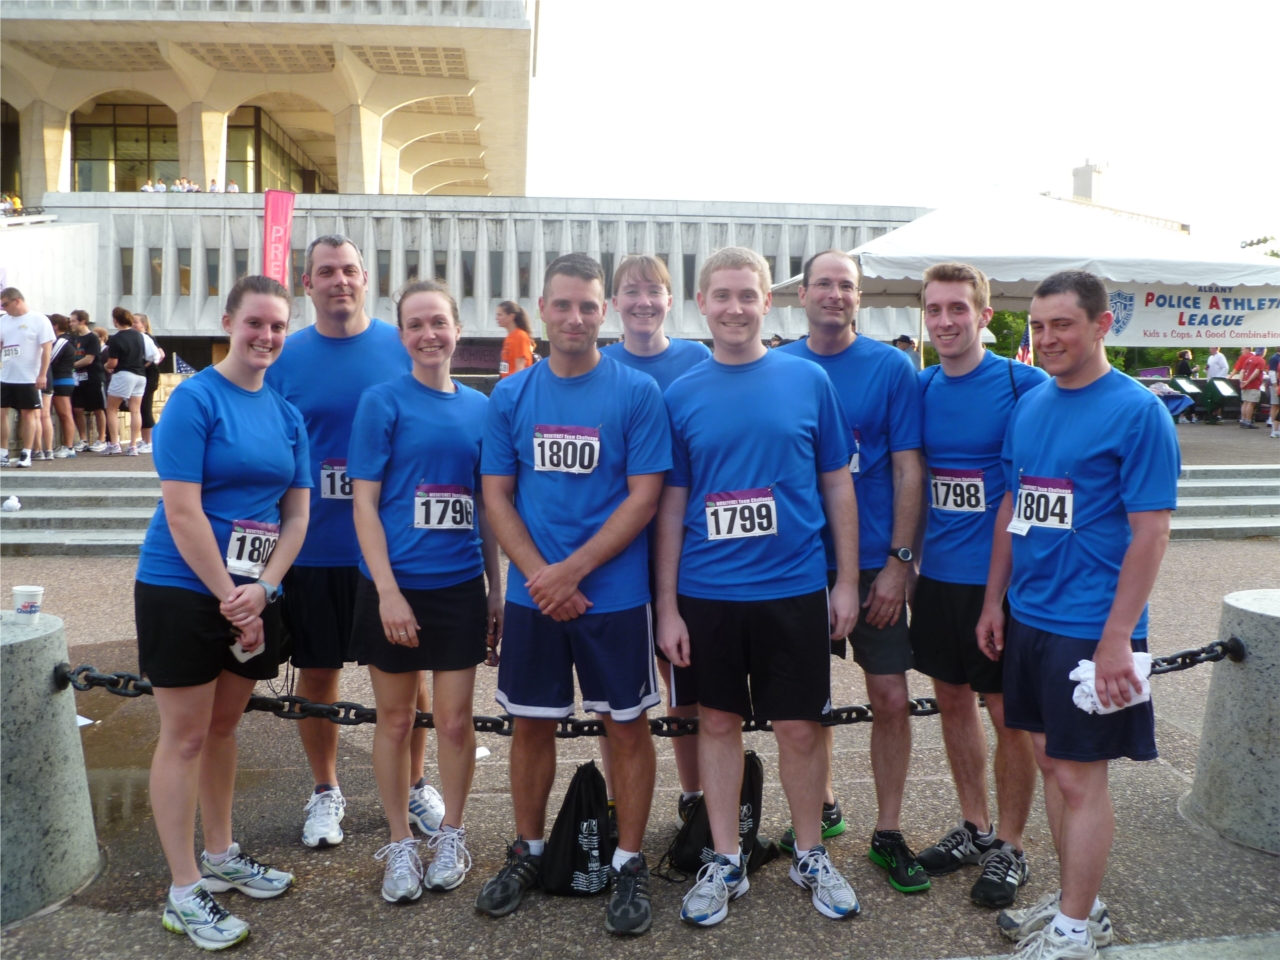 Every year, CHA sponsors a team of runners in the Workforce Challenge 3.5 mile race.  The firm has several programs in place to encourage health and wellness.